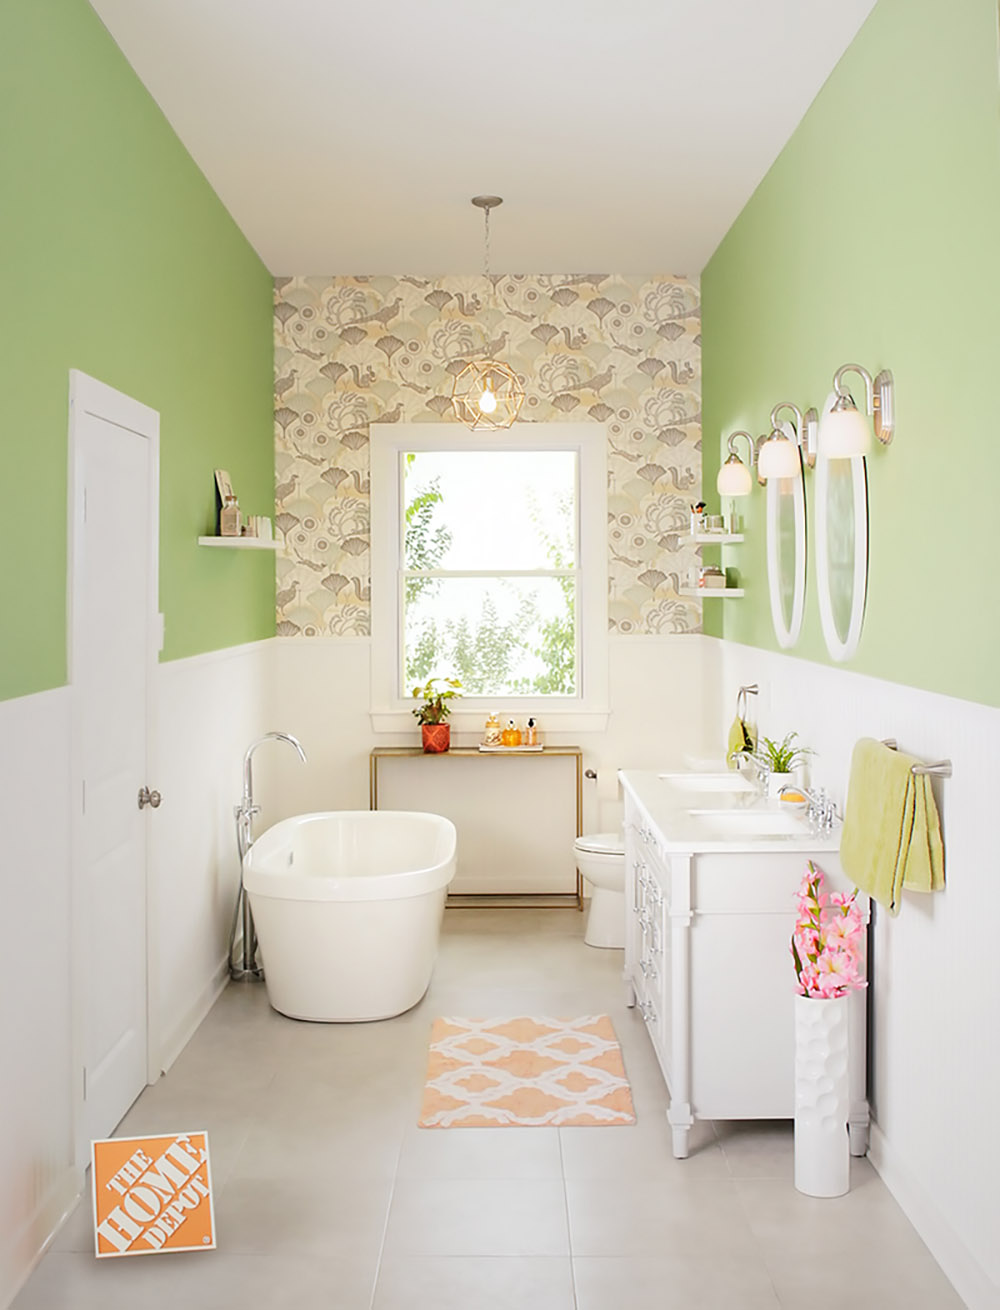 A decorated bathroom with green paint, a floral accent wall, and a hanging light fixture.